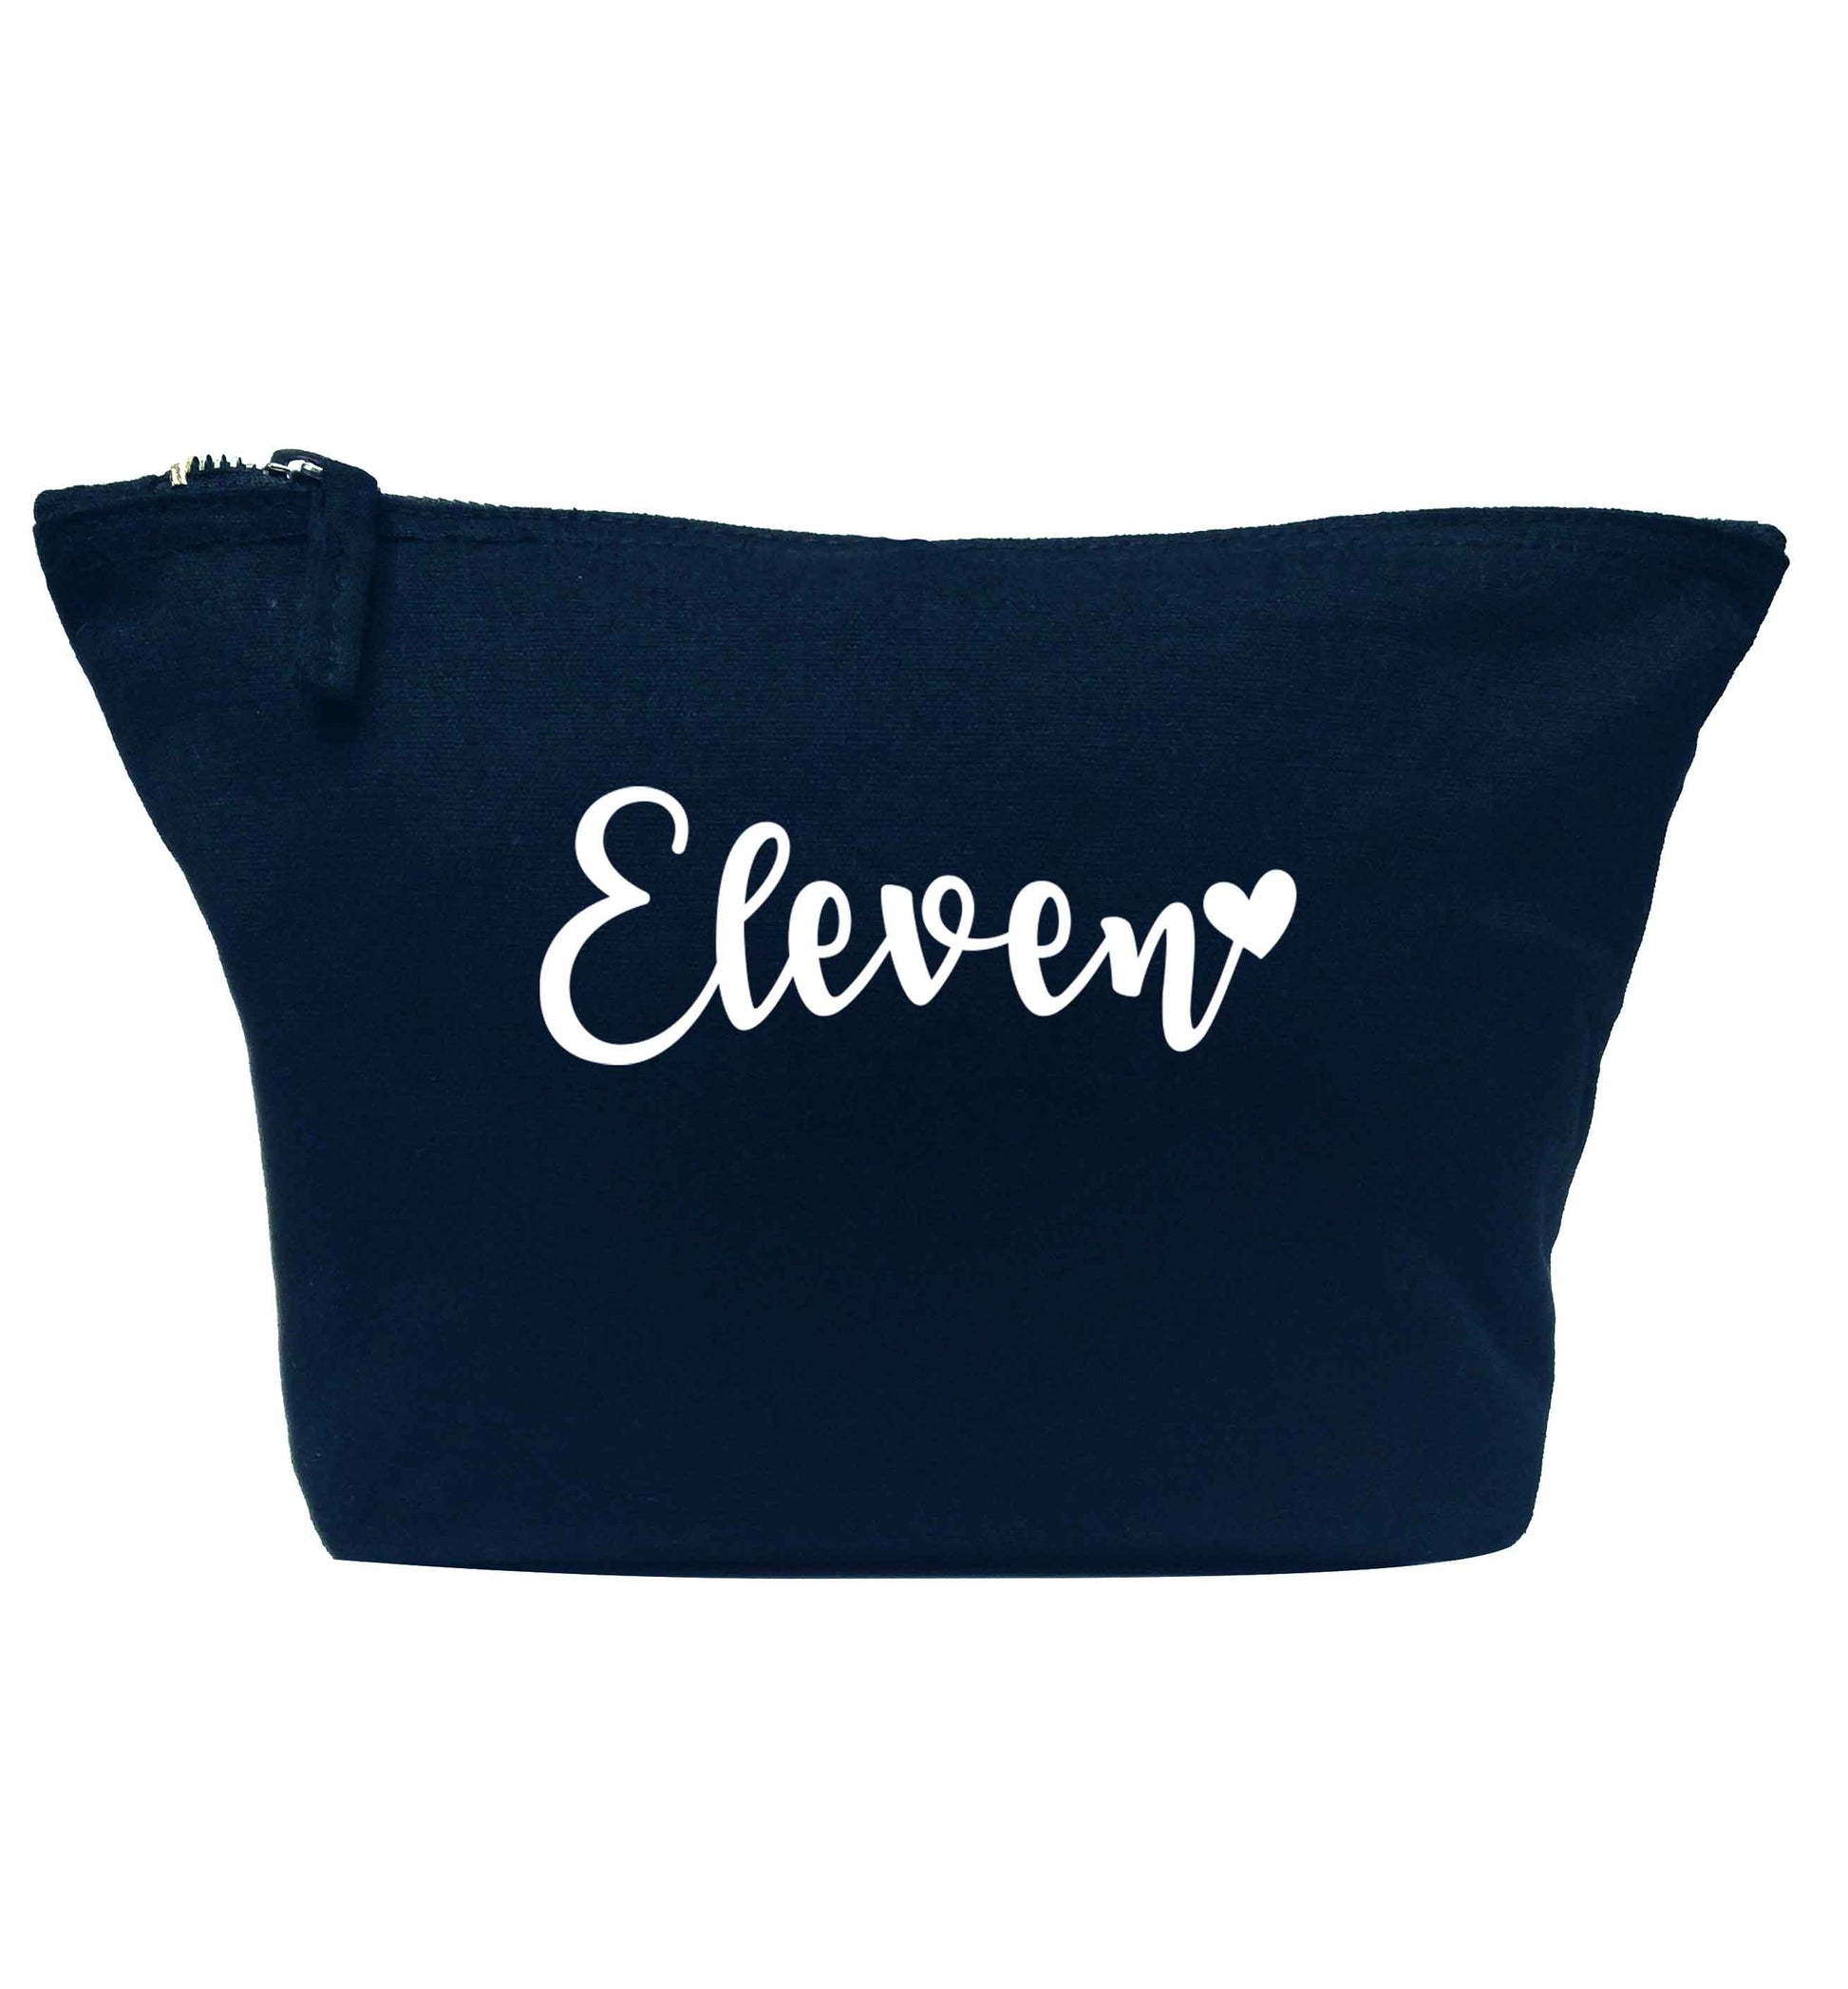 Eleven and heart! navy makeup bag